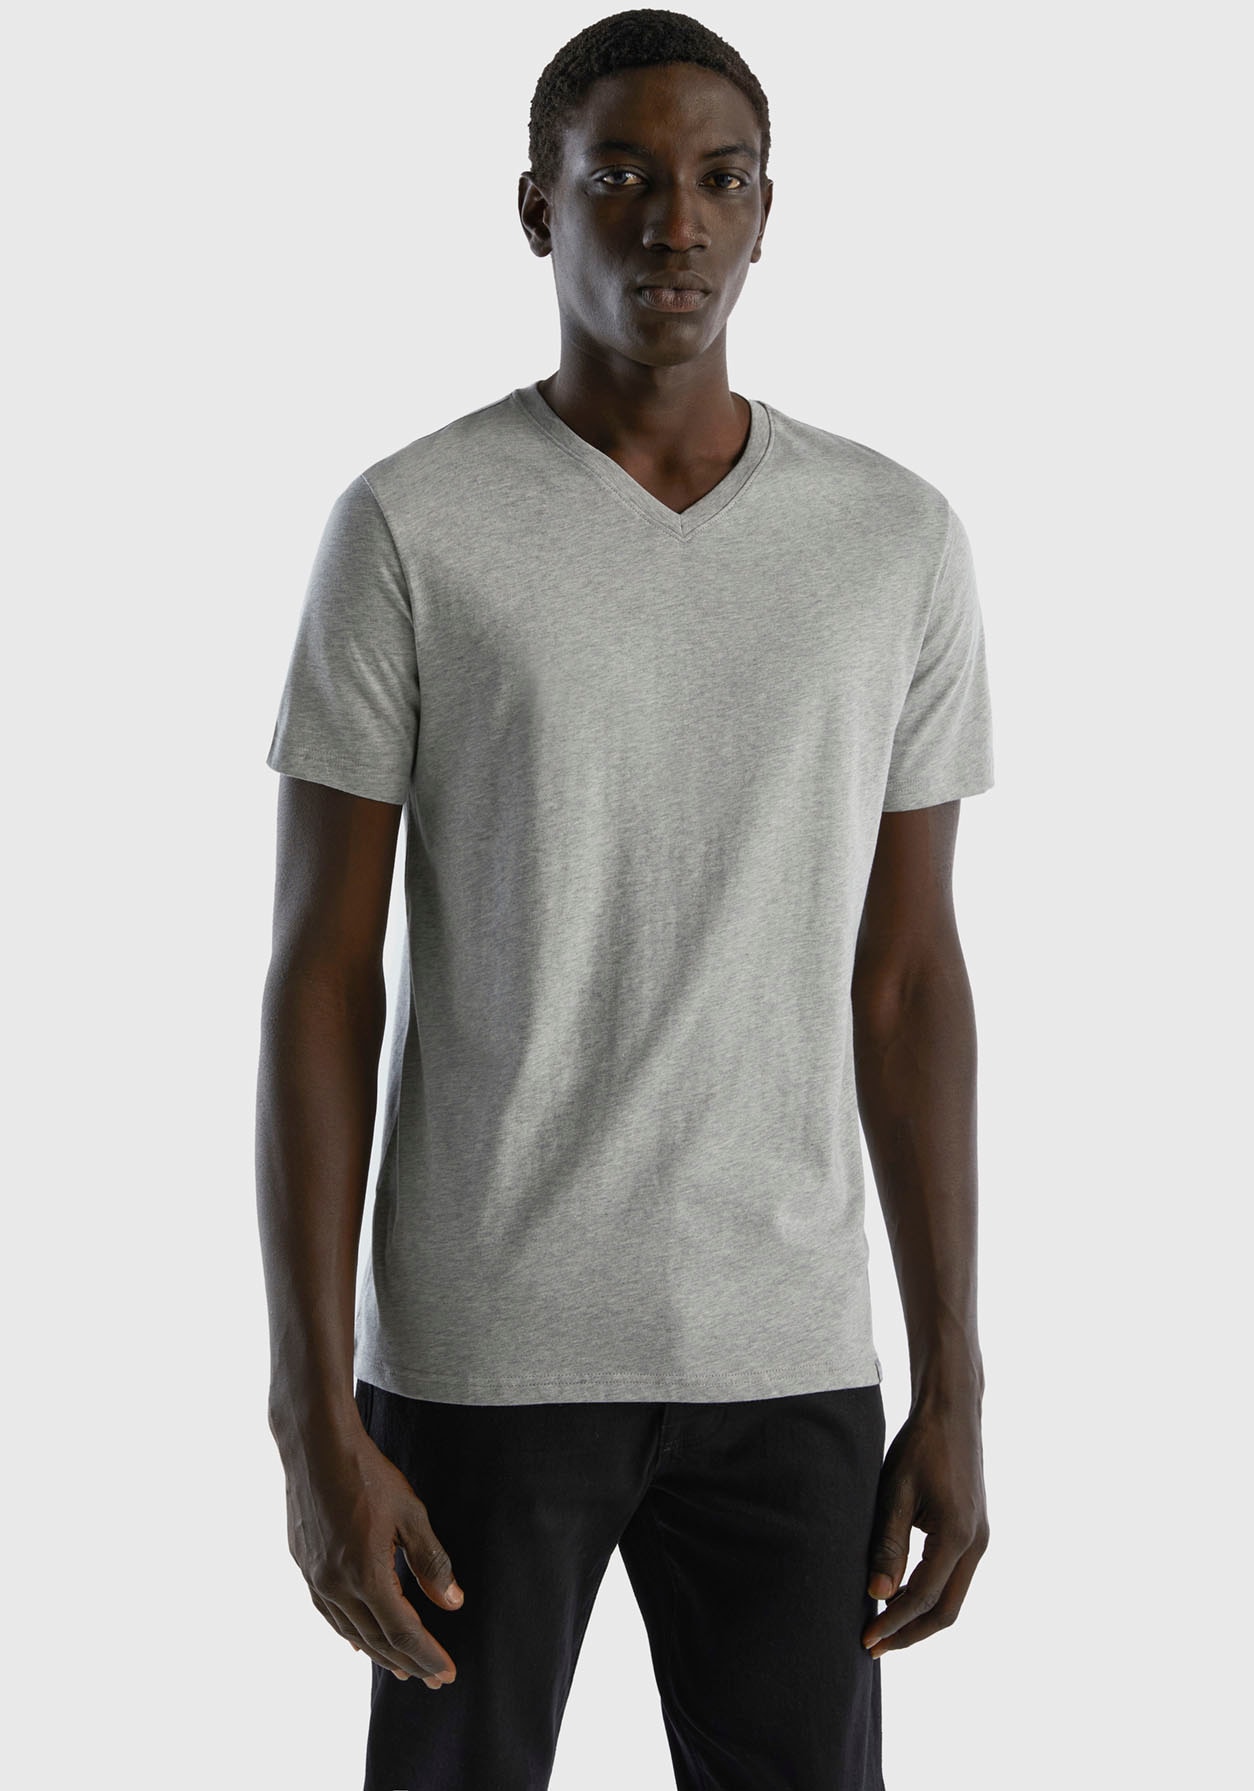 United Colors of online Benetton kaufen cleaner in Basic-Form T-Shirt